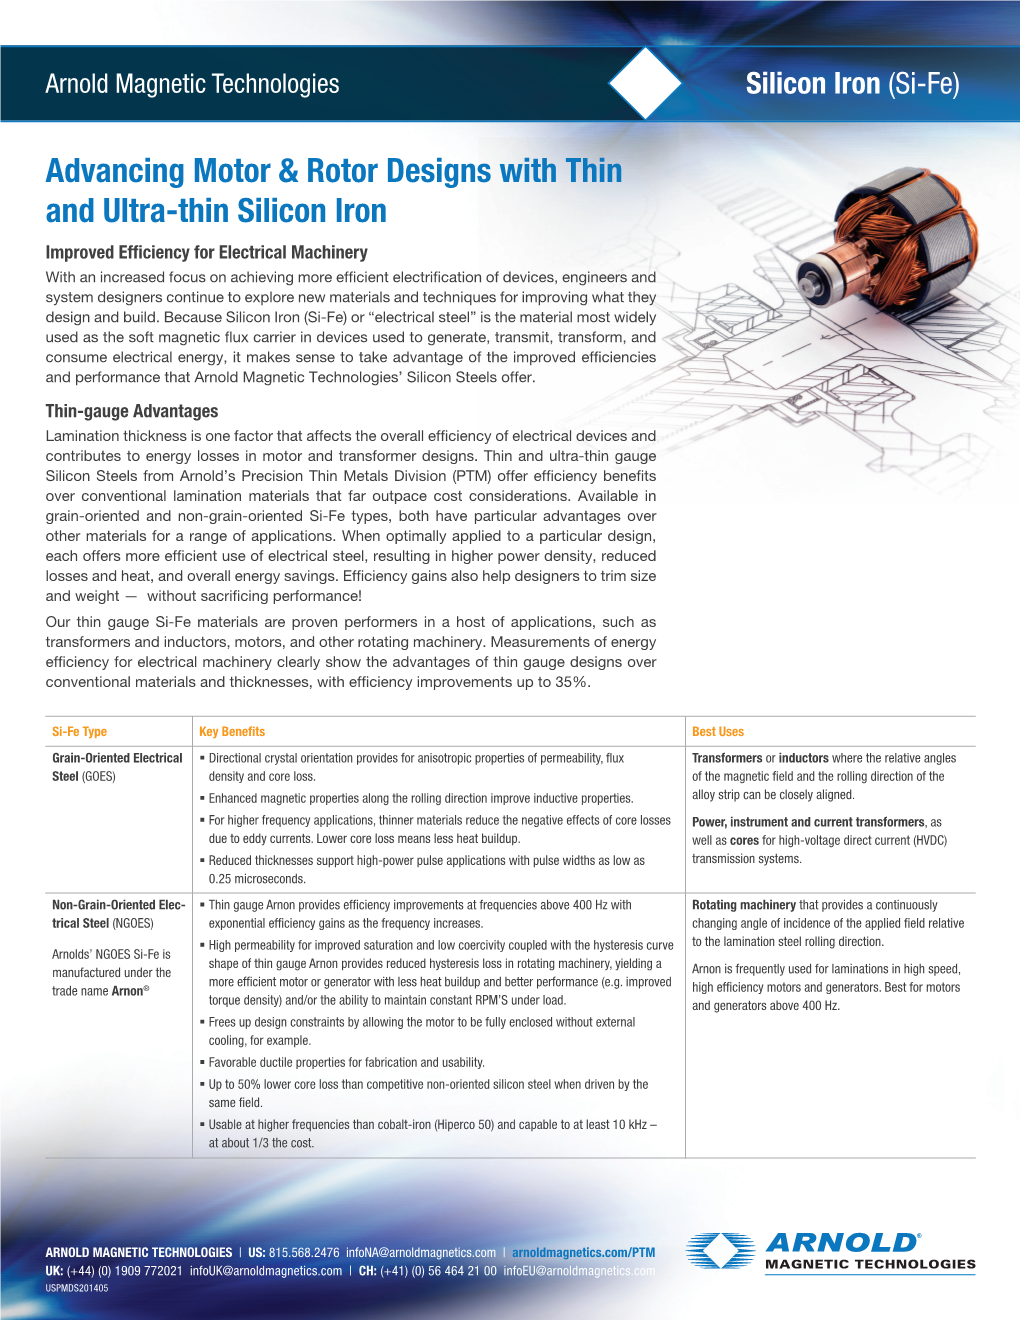 Advancing Motor & Rotor Designs with Thin and Ultra-Thin Silicon Iron